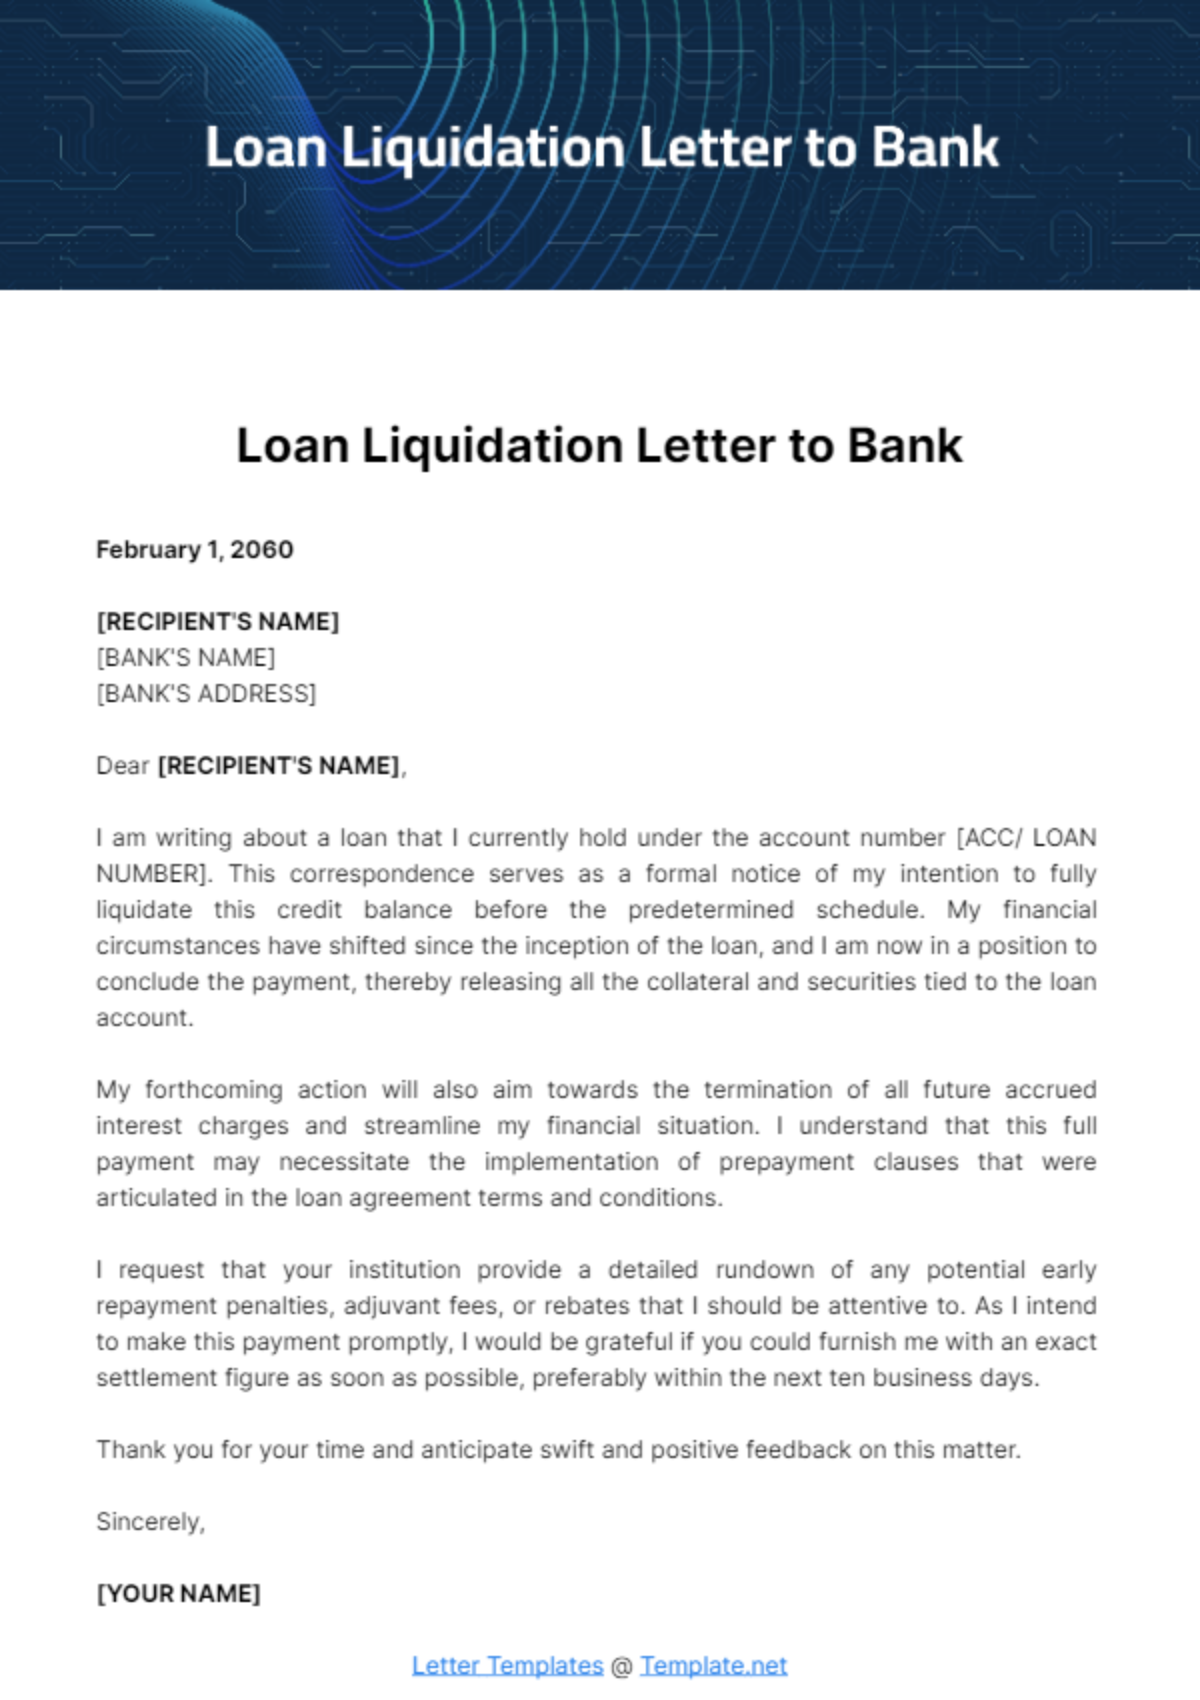 Free Loan Liquidation Letter to Bank Template